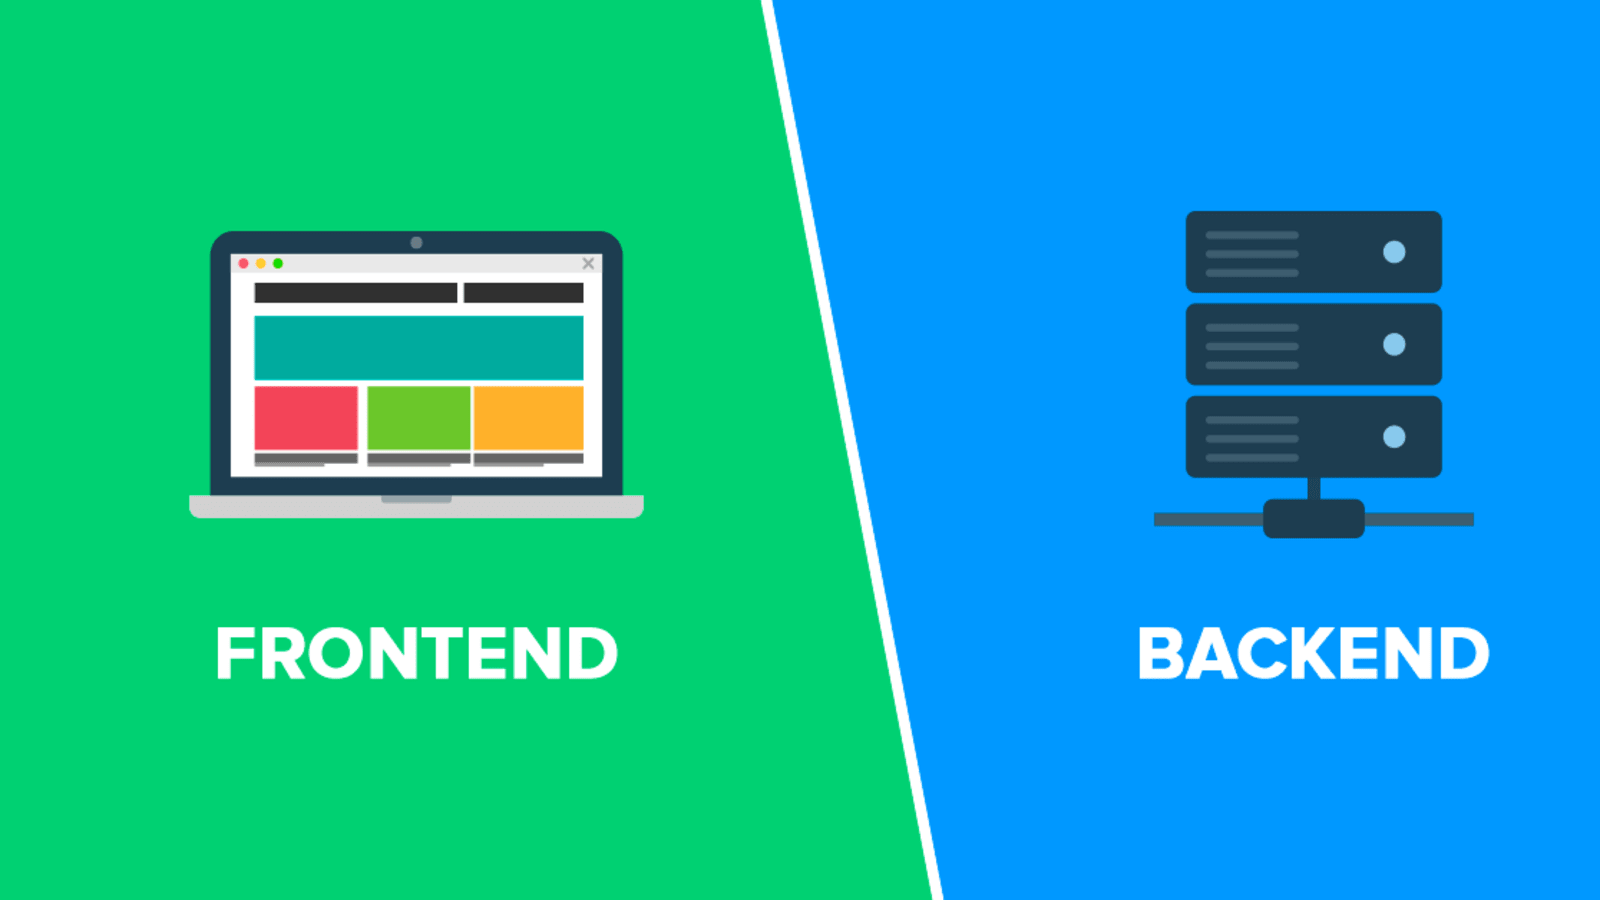 What made you be a frontend or a backend developer?